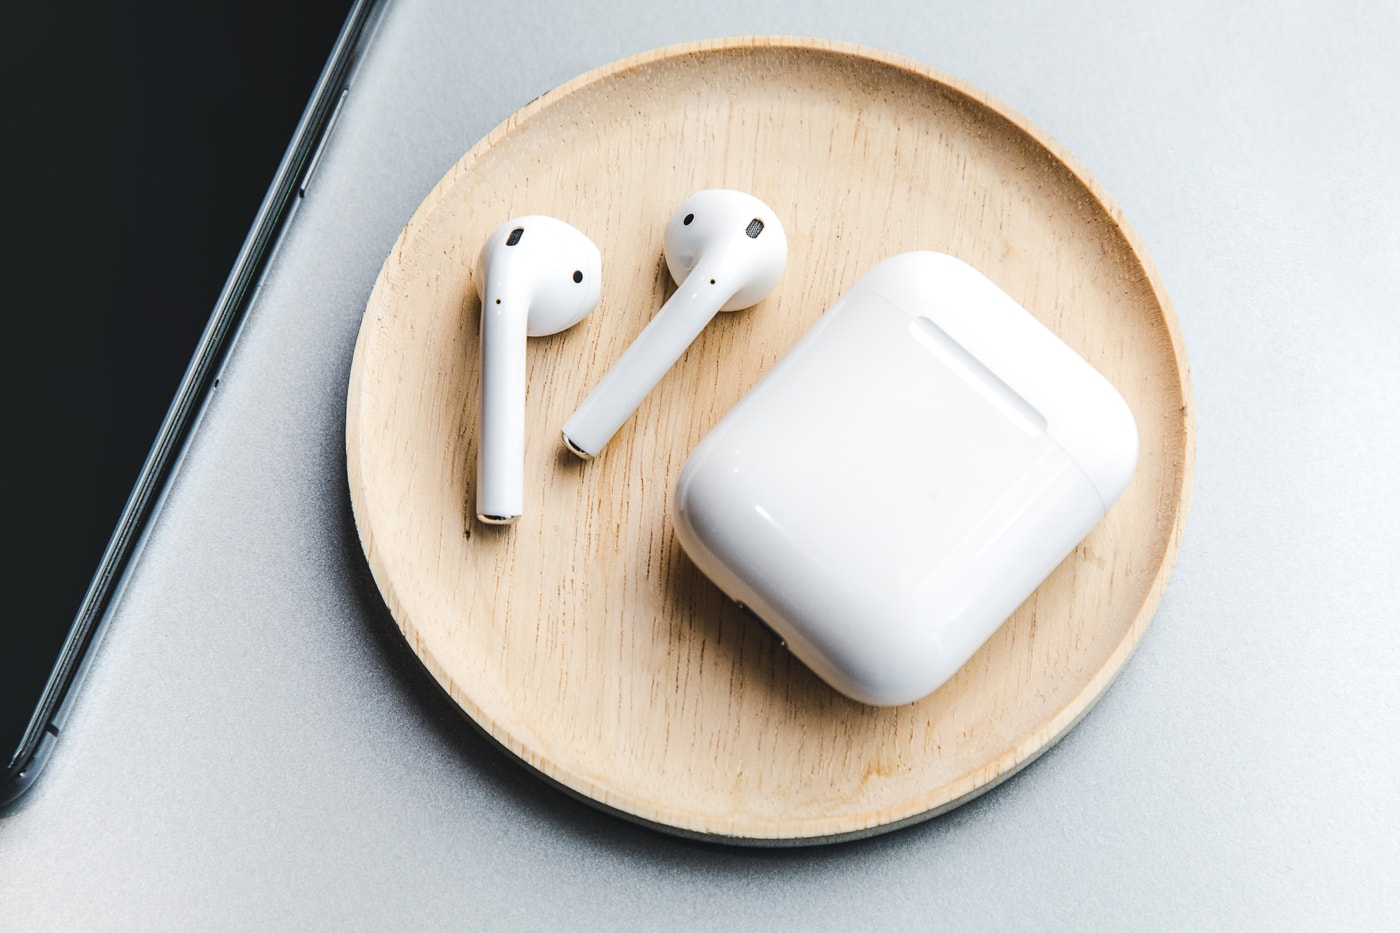 Apple AirPods 2 iPad Mini 5 AirPower Release Rumors Grip Slippery pricing